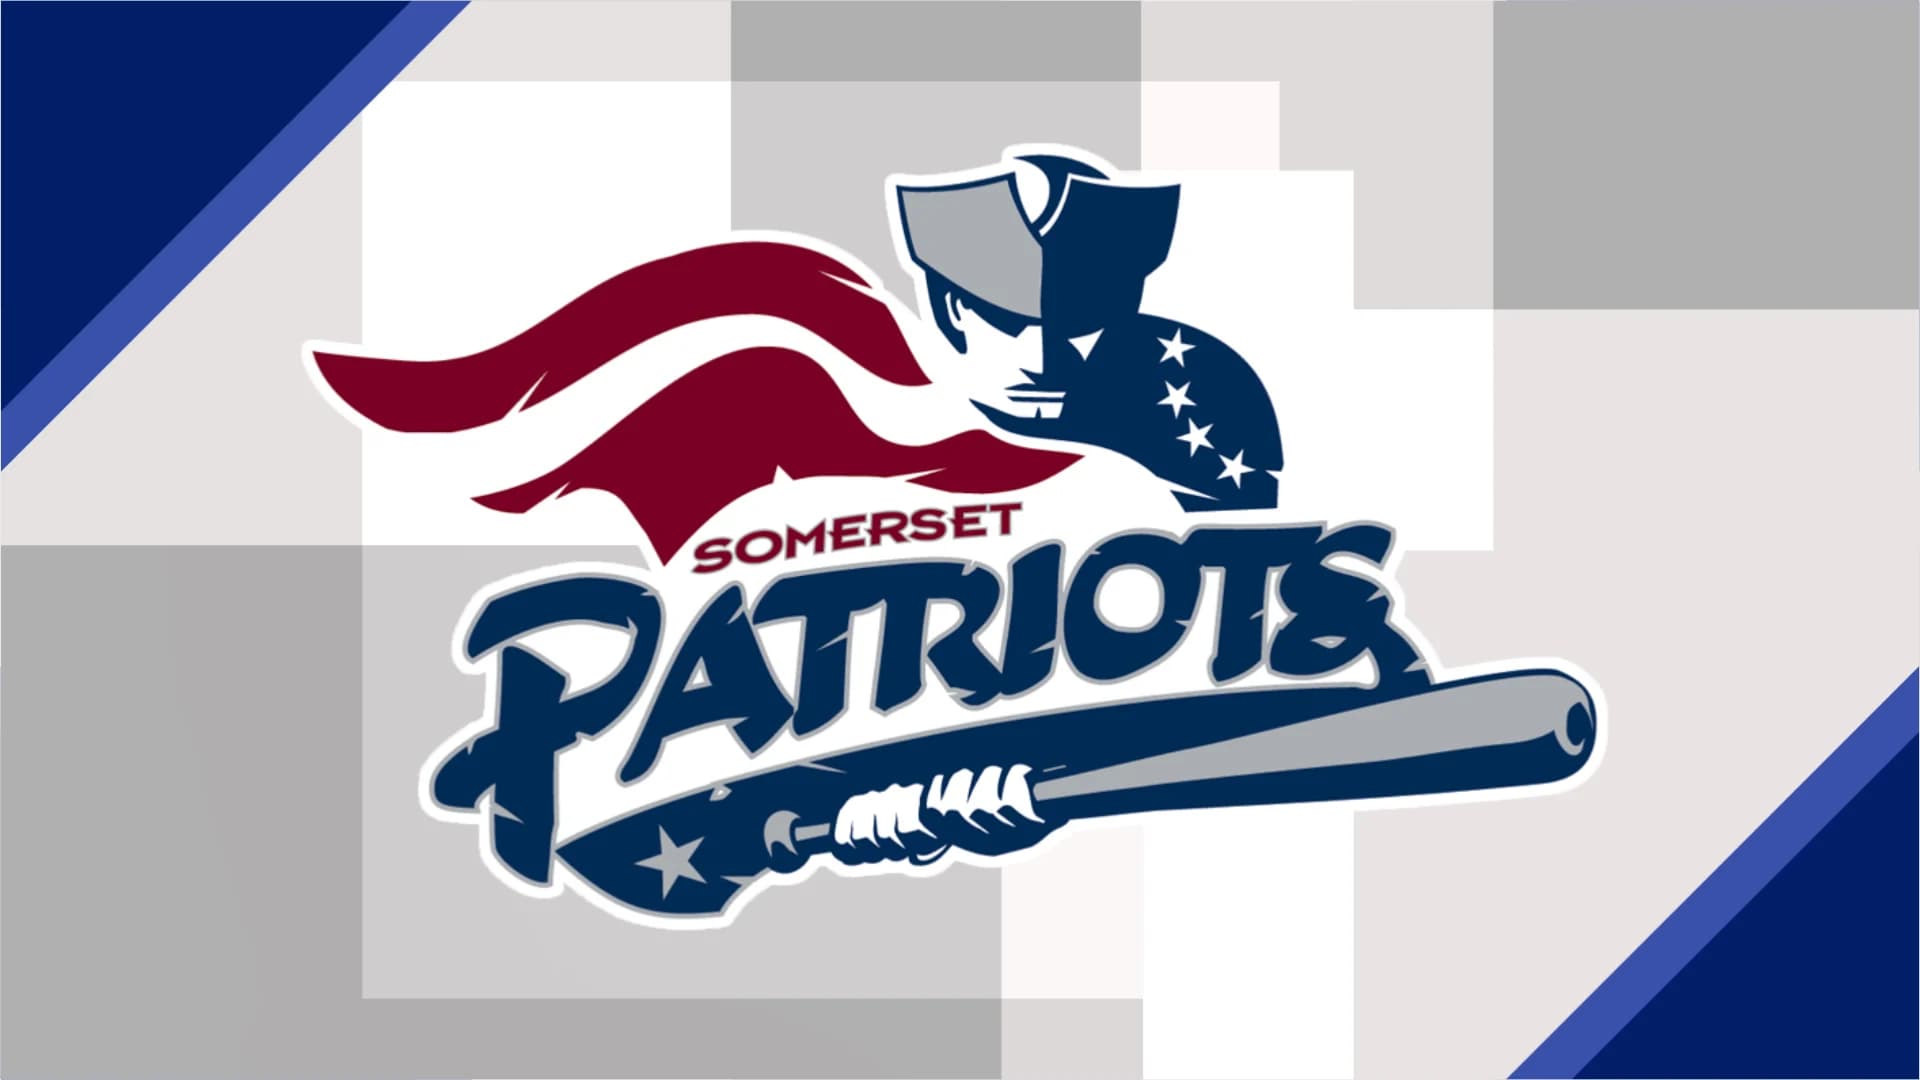 Somerset Patriots unveil ‘Jersey Diners’ rebrand for 3 games, recognizing NJ as diner capital of the world 